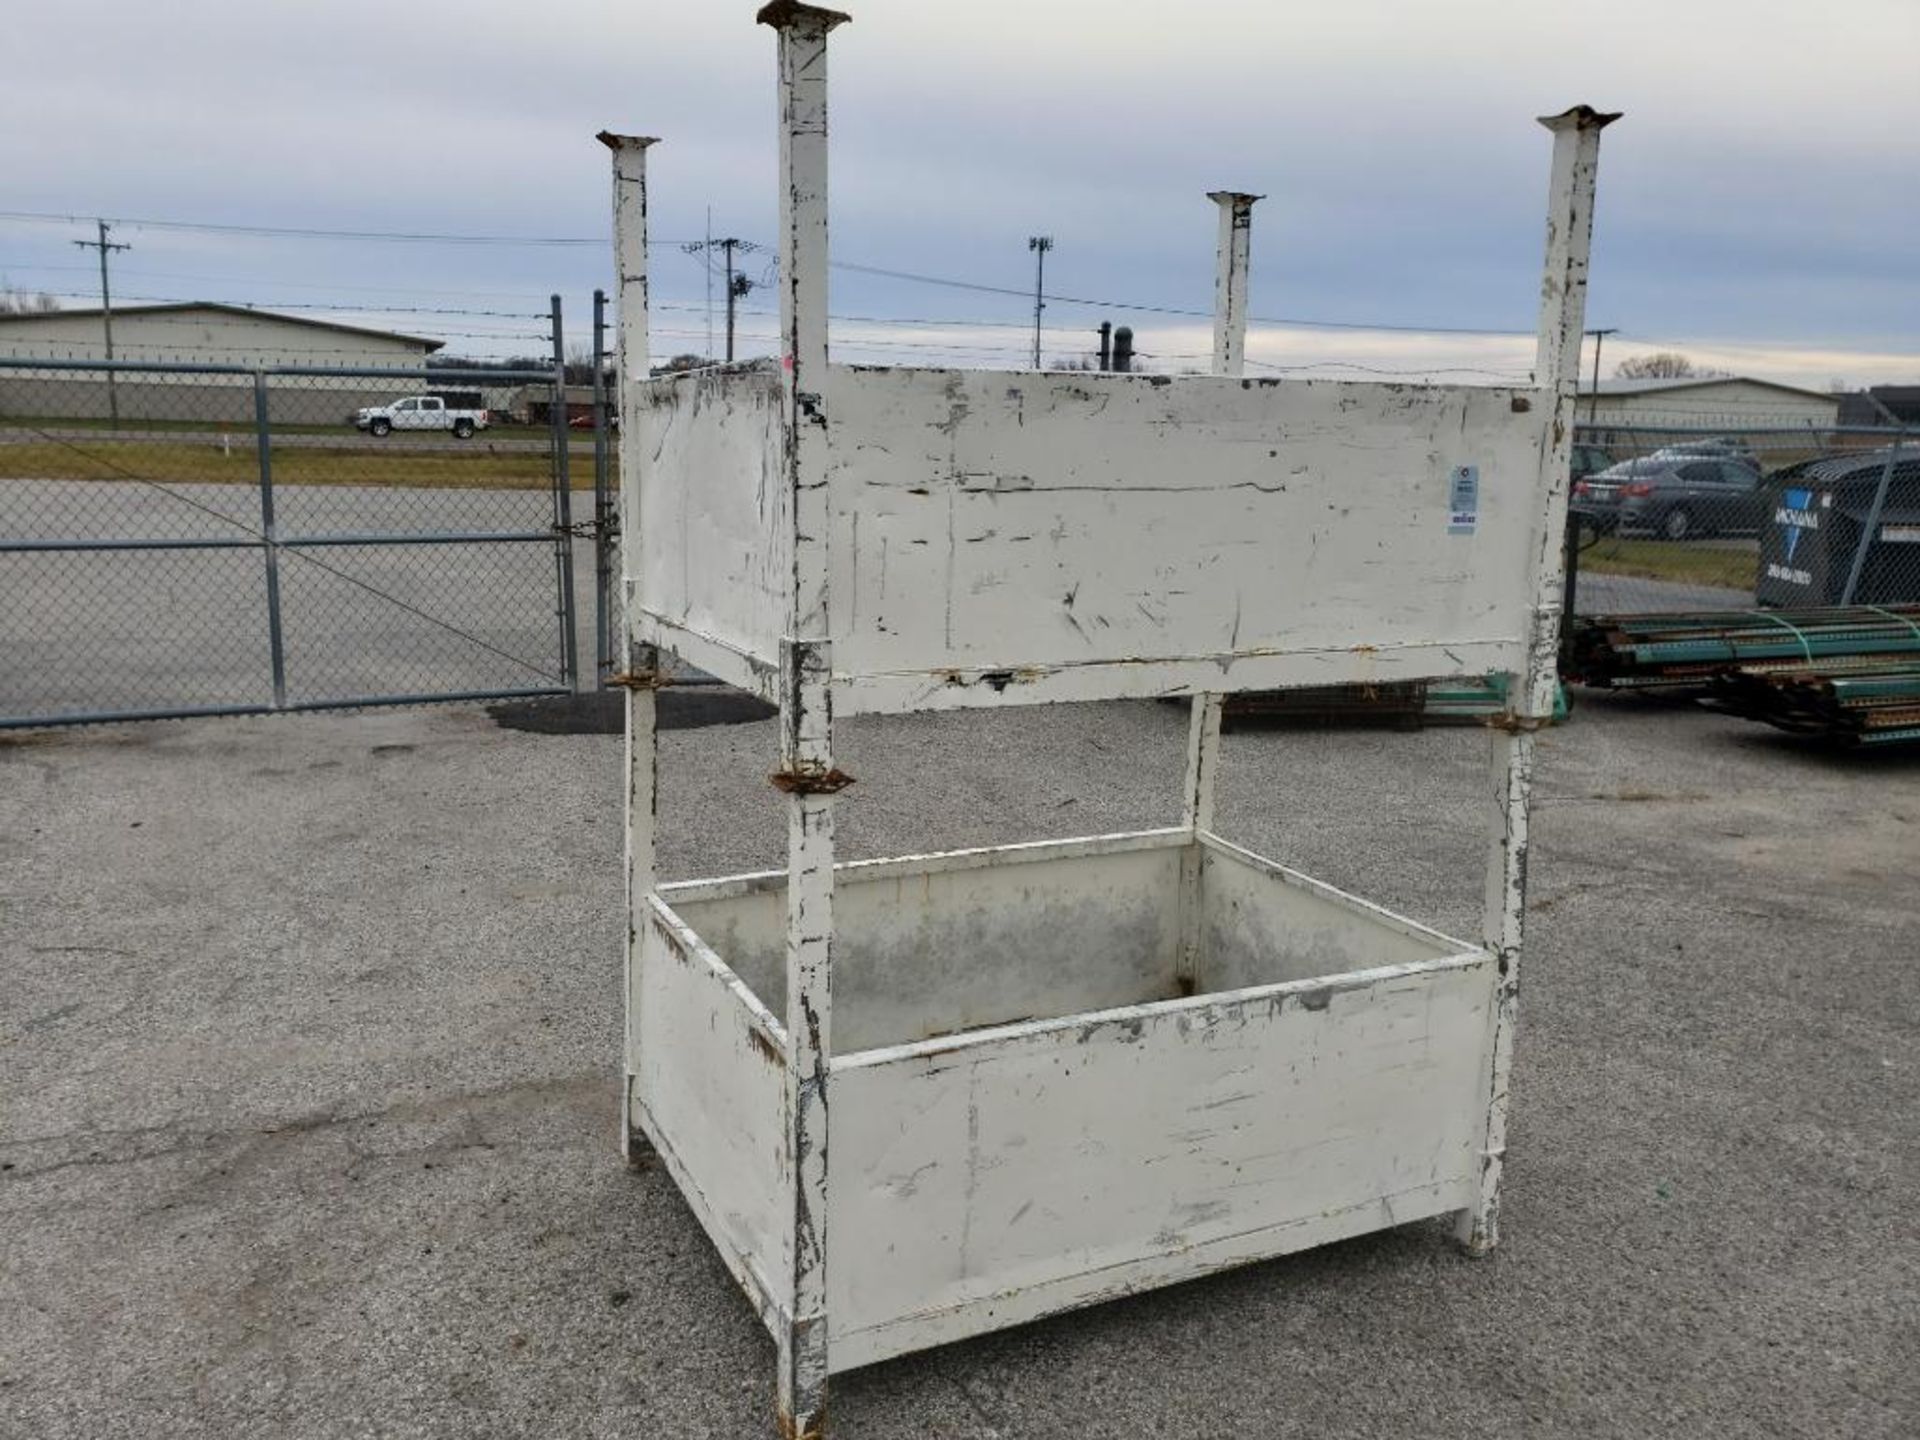 Qty 2 - Steel stackable containers. 60in x 41in x 21in container. 44in with legs.